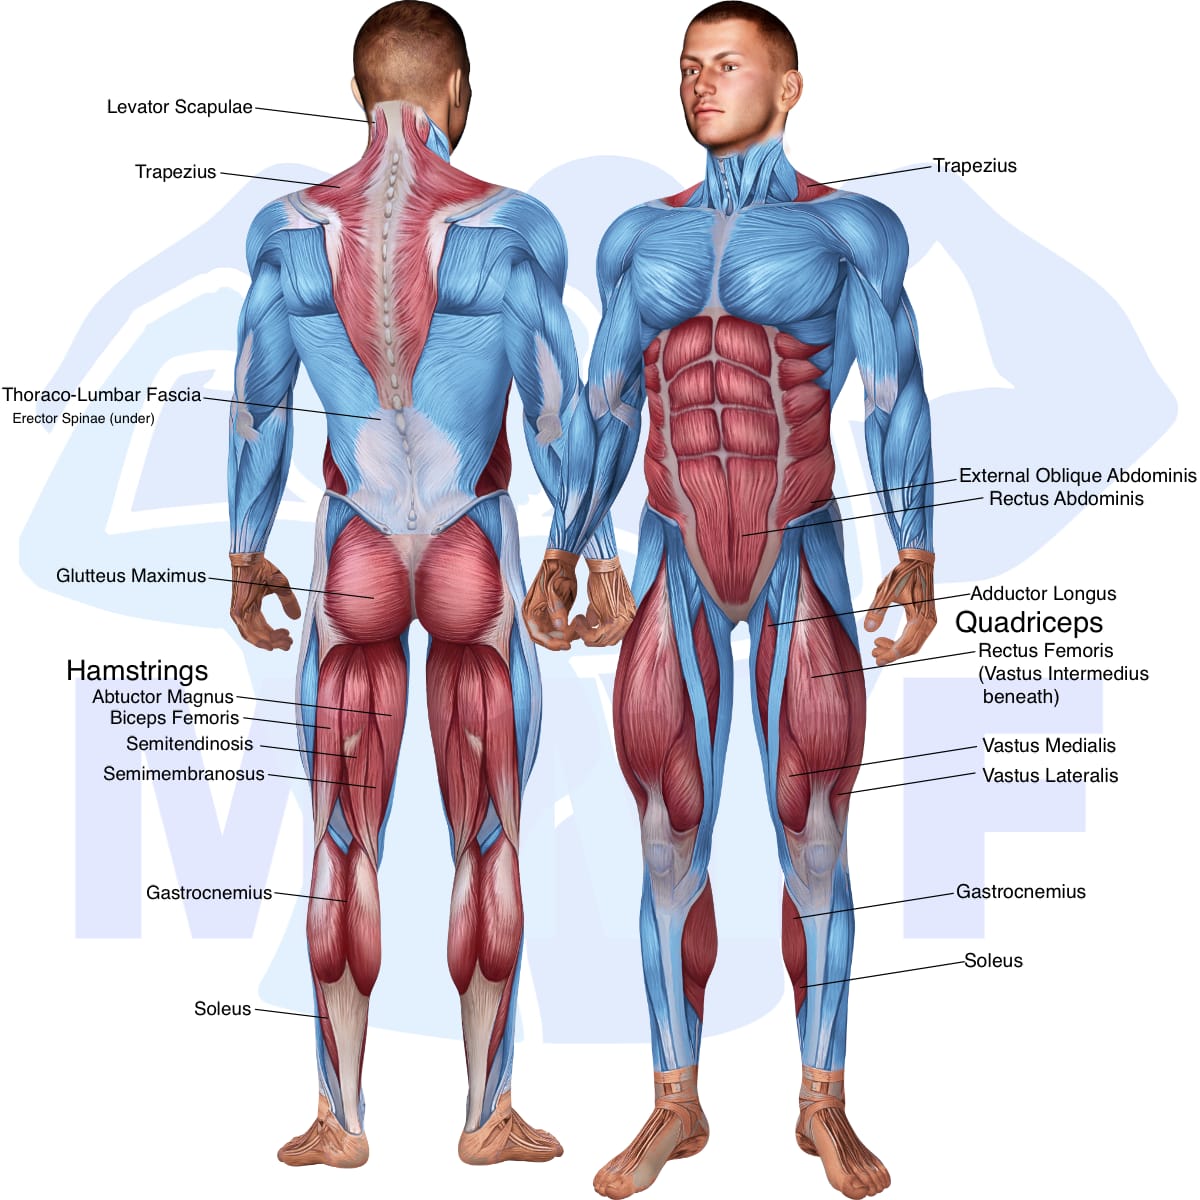 Image of the skeletal muscular system with the muscles used in the dumbbell half squat exercise highlighted in red and the rest in blue.